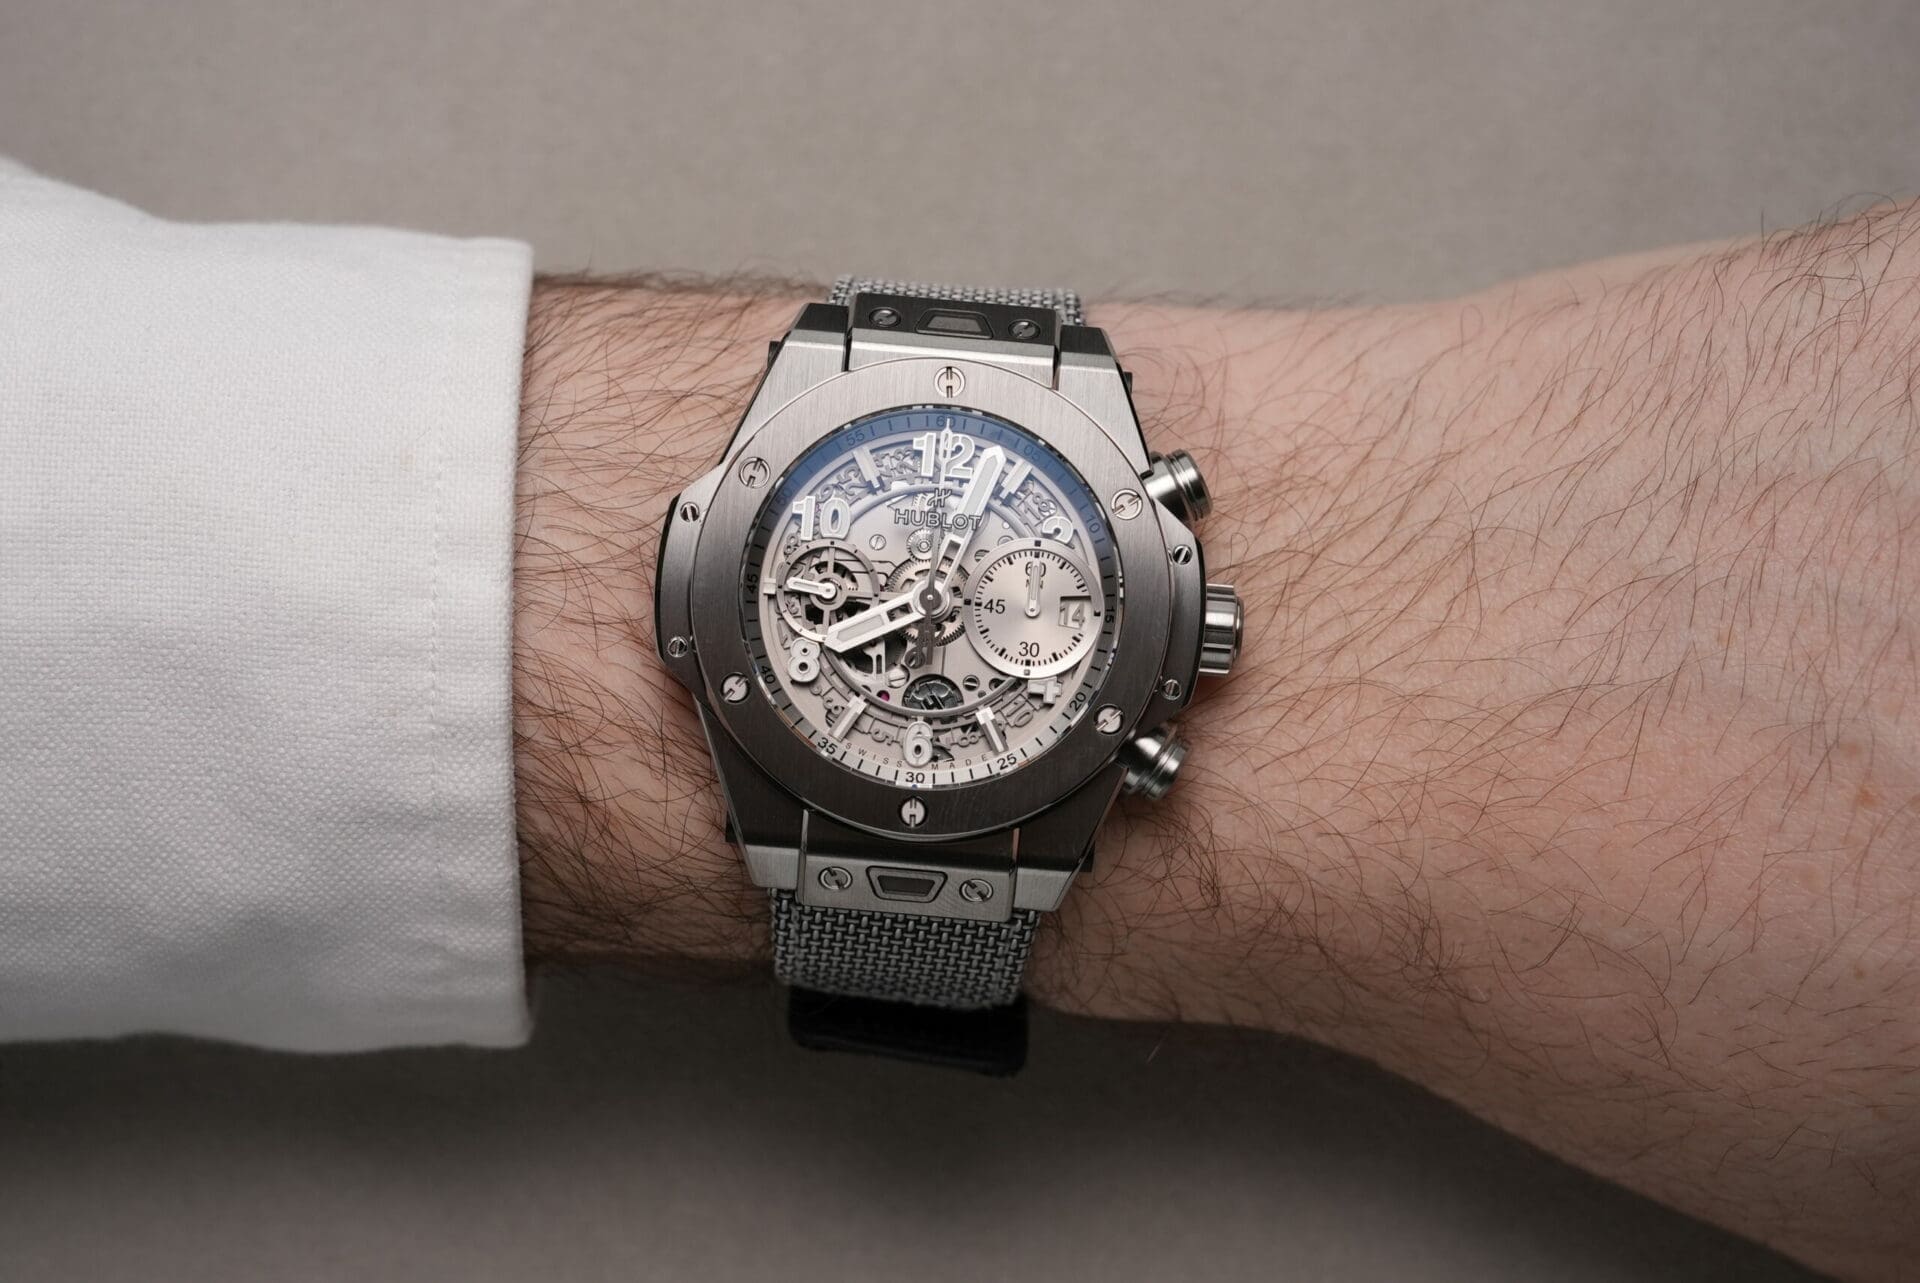 HANDS-ON: The Hublot Big Bang Unico Essential Grey Limited Edition